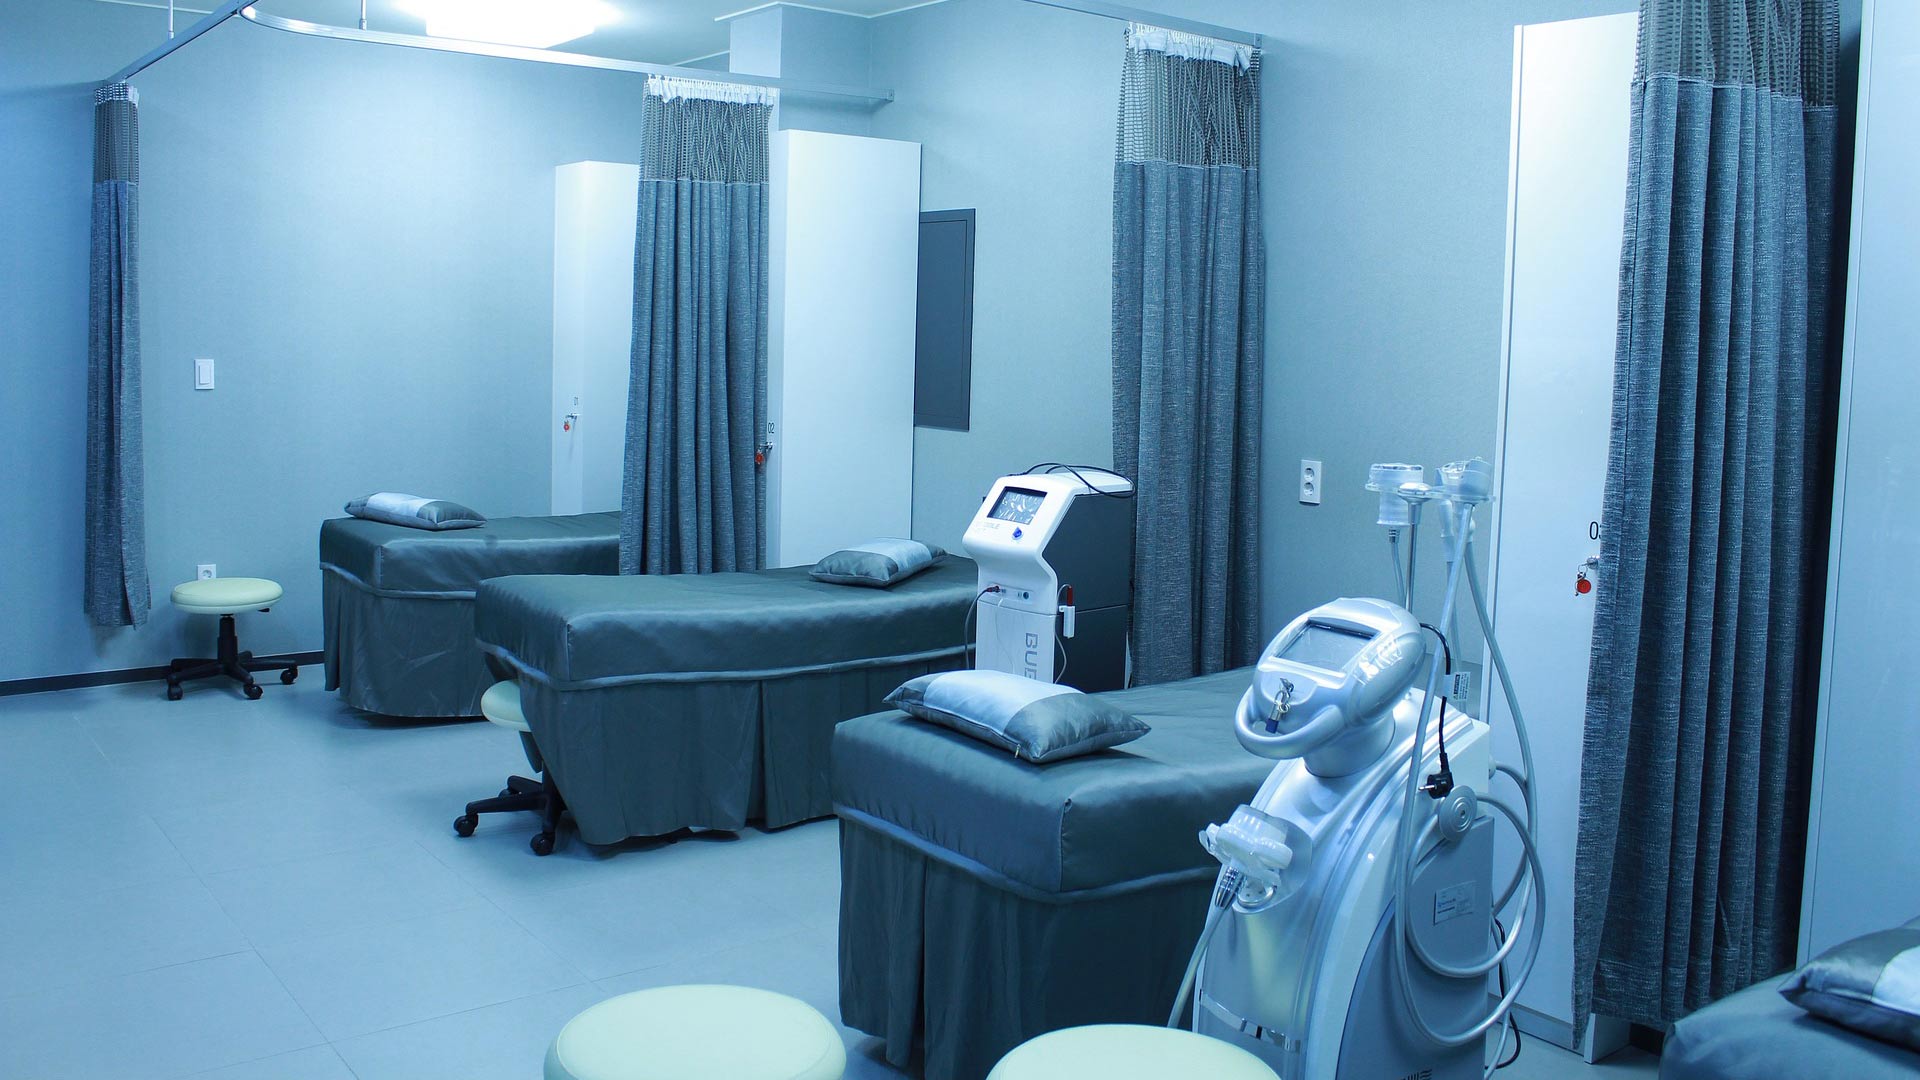 Hospital beds lined up in a room.